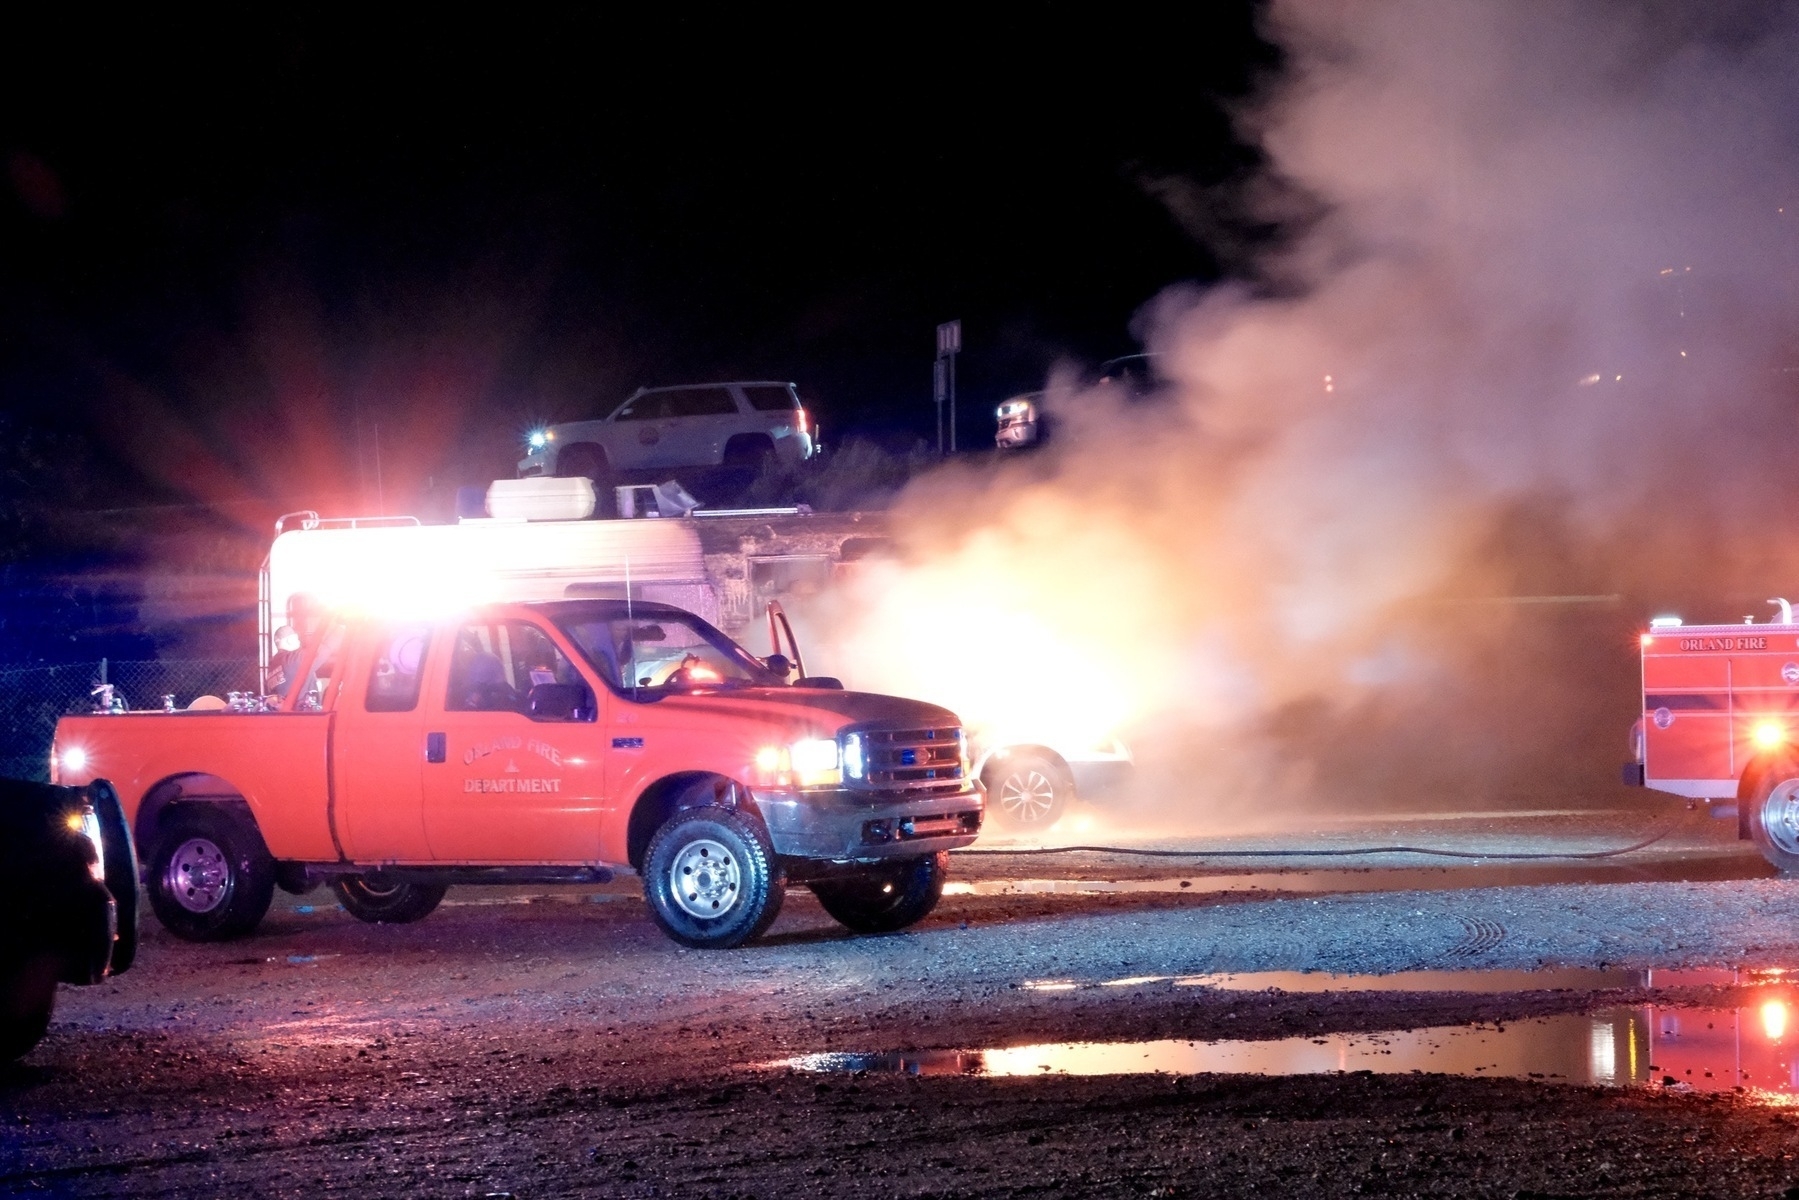 A wide angle view of the RV and car on fire, in front of an overpass. Two fire trucks are parked in front of the blaze on a gravel lot with some ponding.